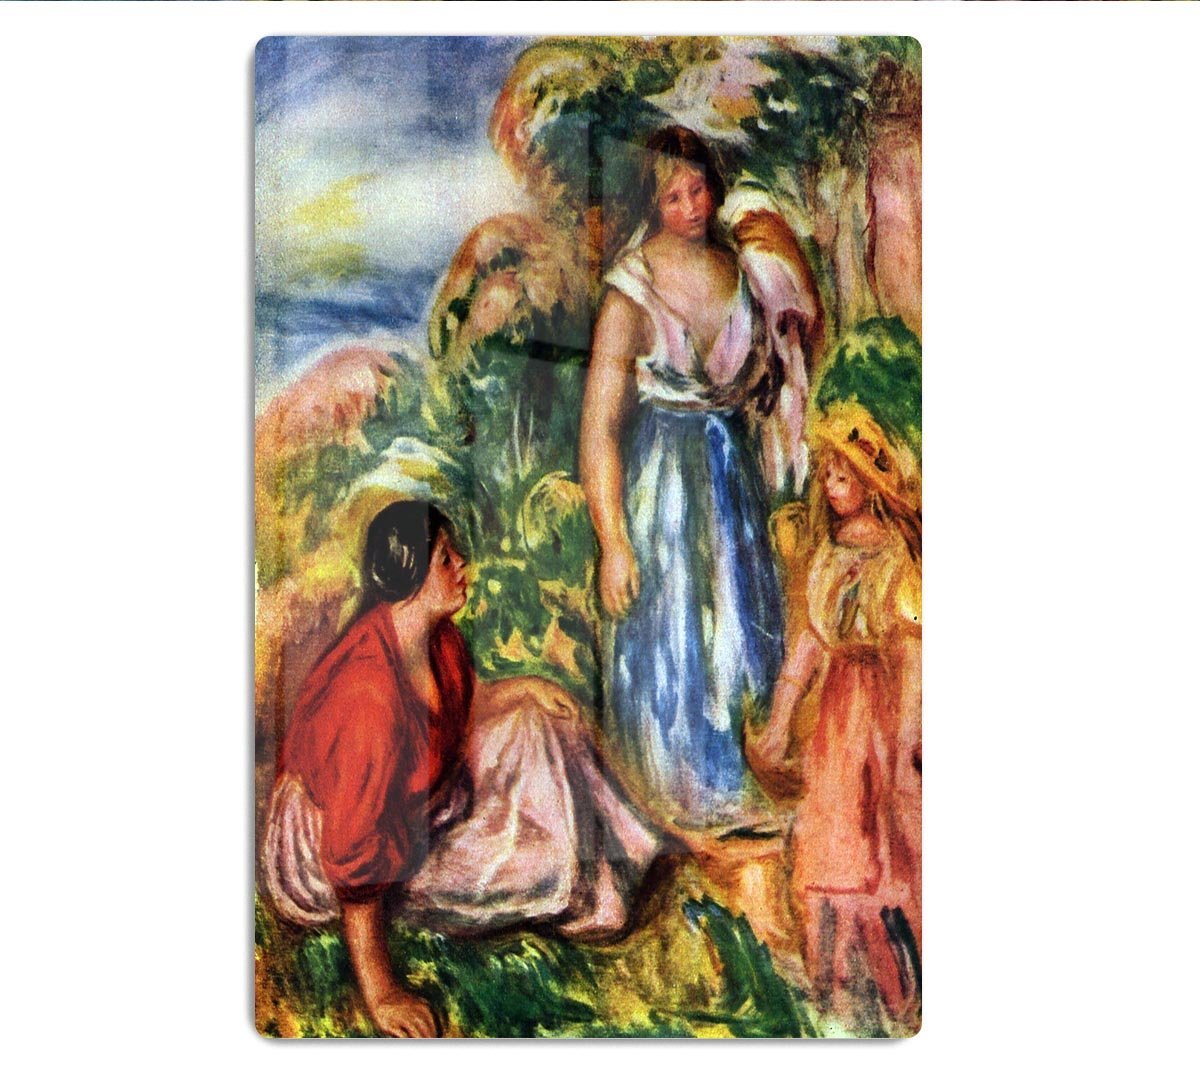 Two women with young girls in a landscape by Renoir HD Metal Print